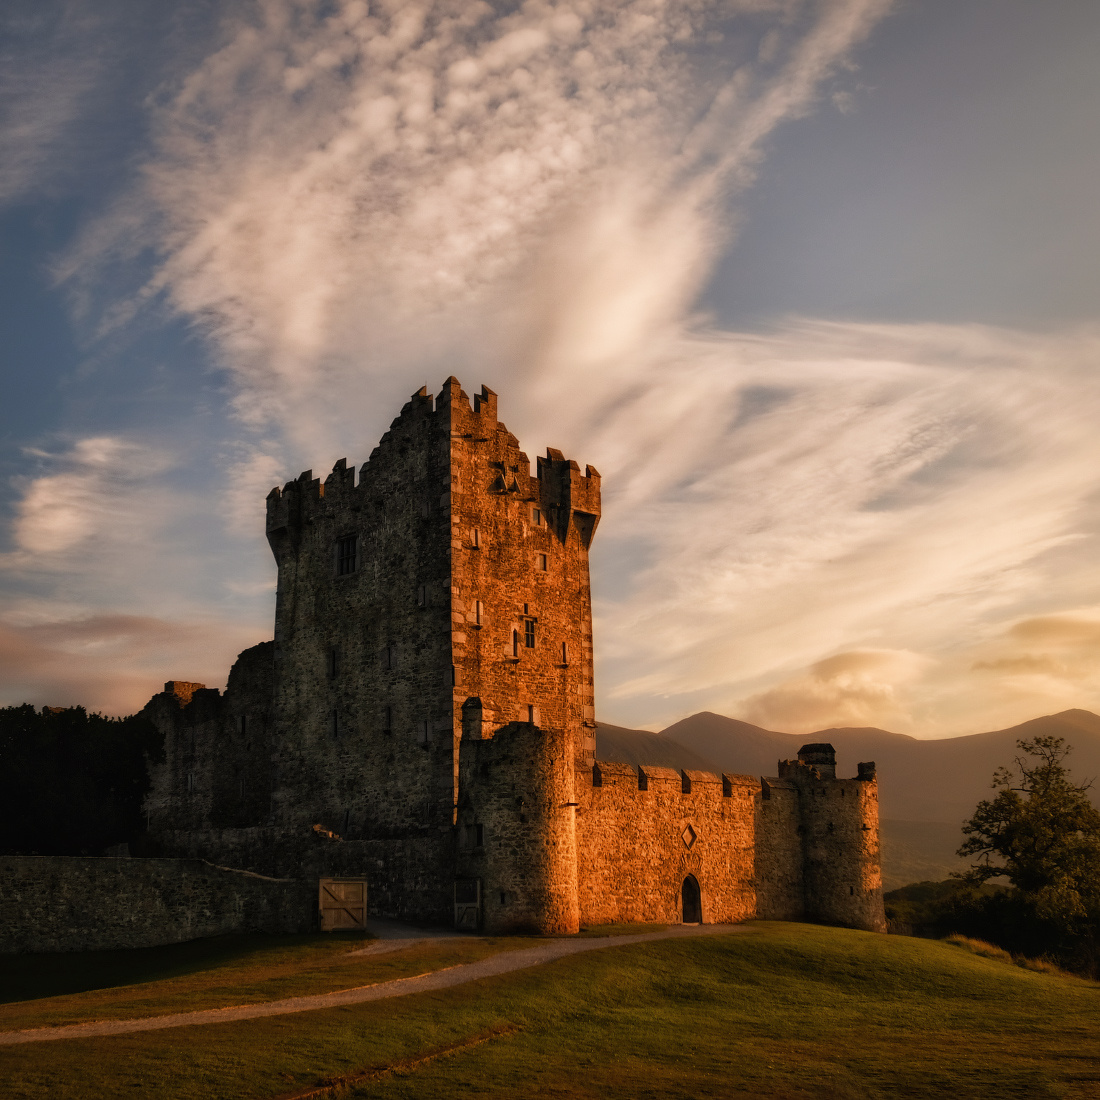 ...Ross castle... ireland kerry killarney ross castle sunset mountains landscape architechture old history ancientmfortress tower stone sky clouds cloudscape outdoors scenic scenery dramatic picturesque europe